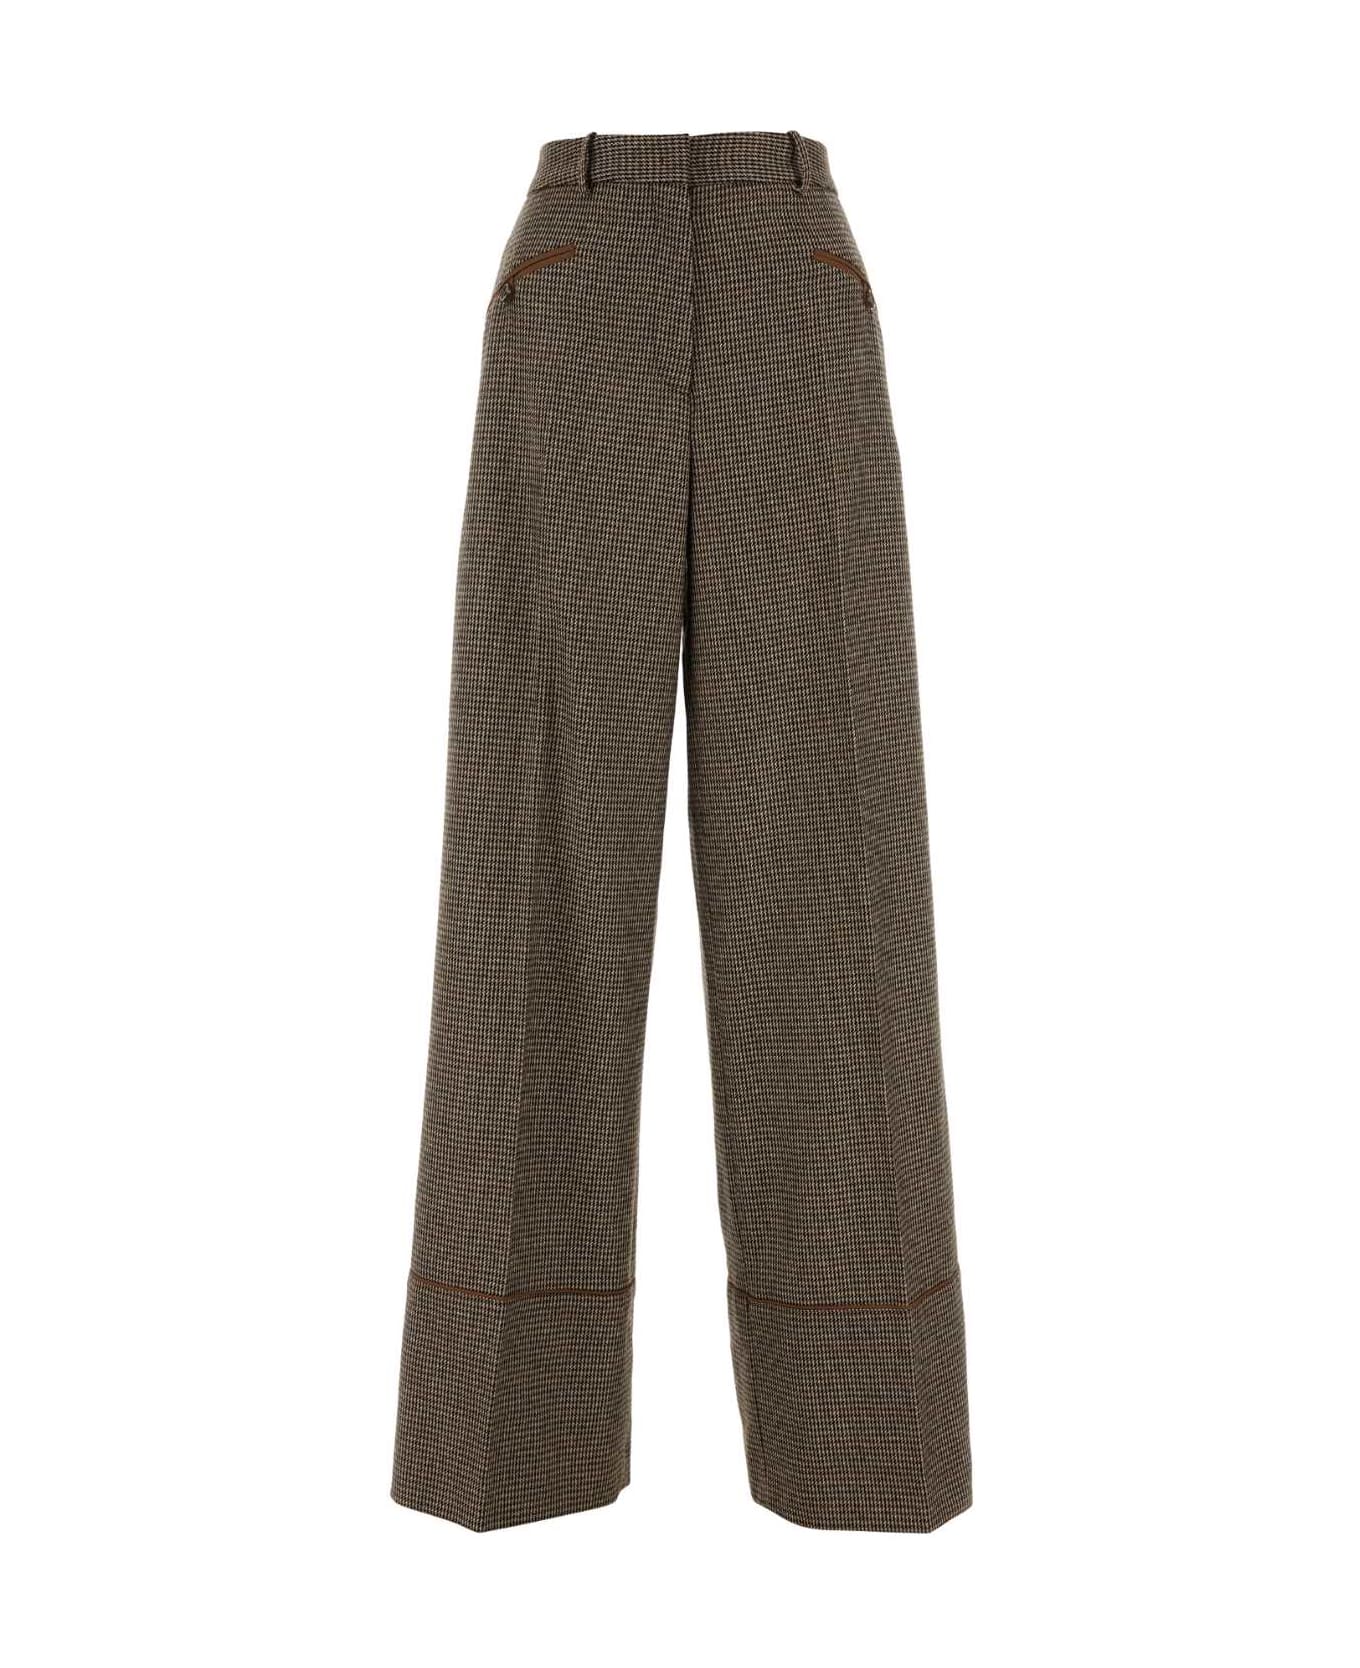 Bally Embroidered Stretch Wool Blend Wide-leg Pant - I8D5 ボトムス